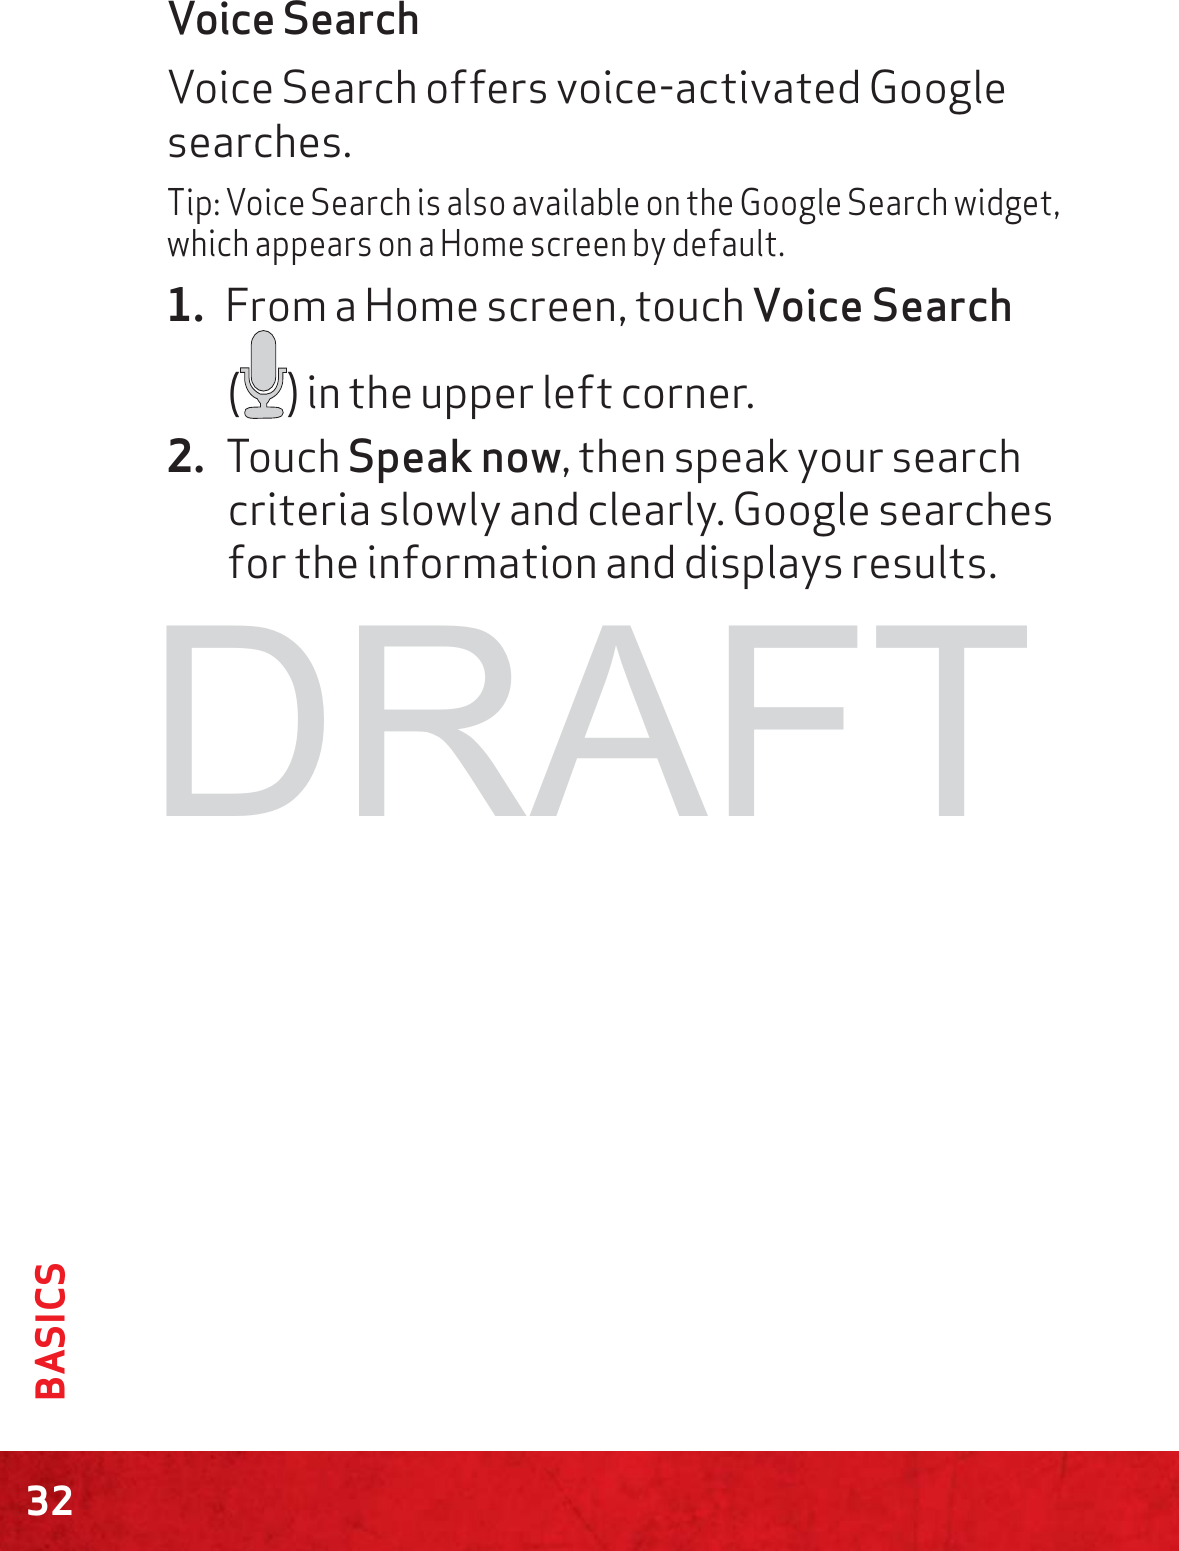 32BASICSVoice SearchVoice Search offers voice-activated Google searches.Tip: Voice Search is also available on the Google Search widget, which appears on a Home screen by default.1. From a Home screen, touch Voice Search  () in the upper left corner.2. Touch Speak now, then speak your search criteria slowly and clearly. Google searches for the information and displays results.DRAFT